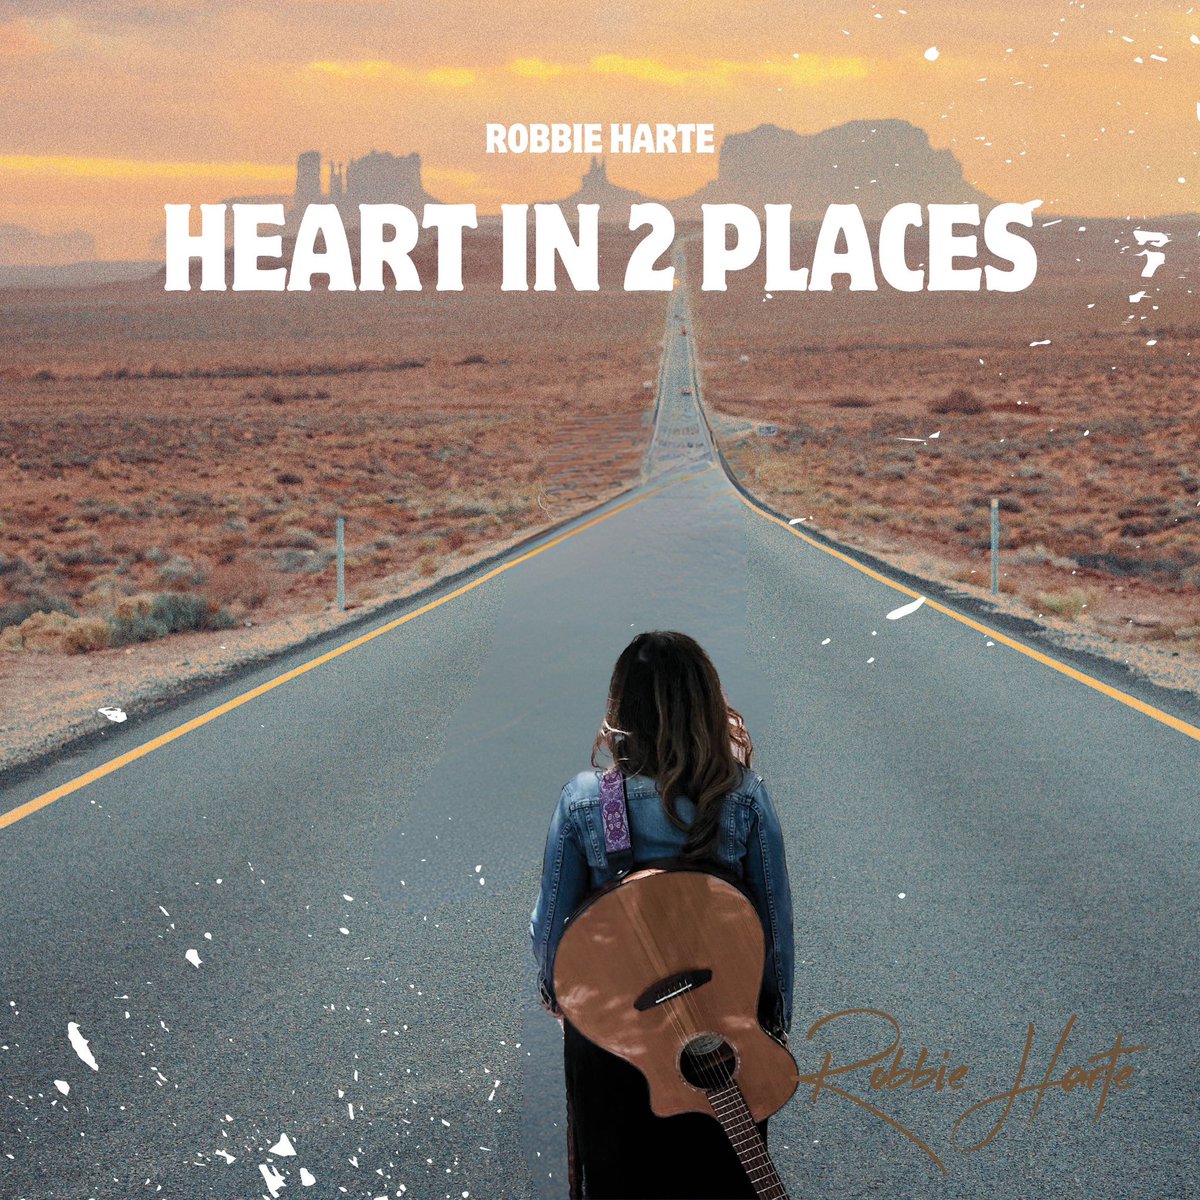 ⭐️NEW RELEASE ⭐️ I’m excited to announce the release of my BRAND NEW Single ‘Heart In 2 Places’, which will be available on all platforms April 19th! I can’t wait to share this song with you! 🎶❤️ Stay tuned! Xx Robbie #countrysingersongwriter #countrymusic #newmusic #country